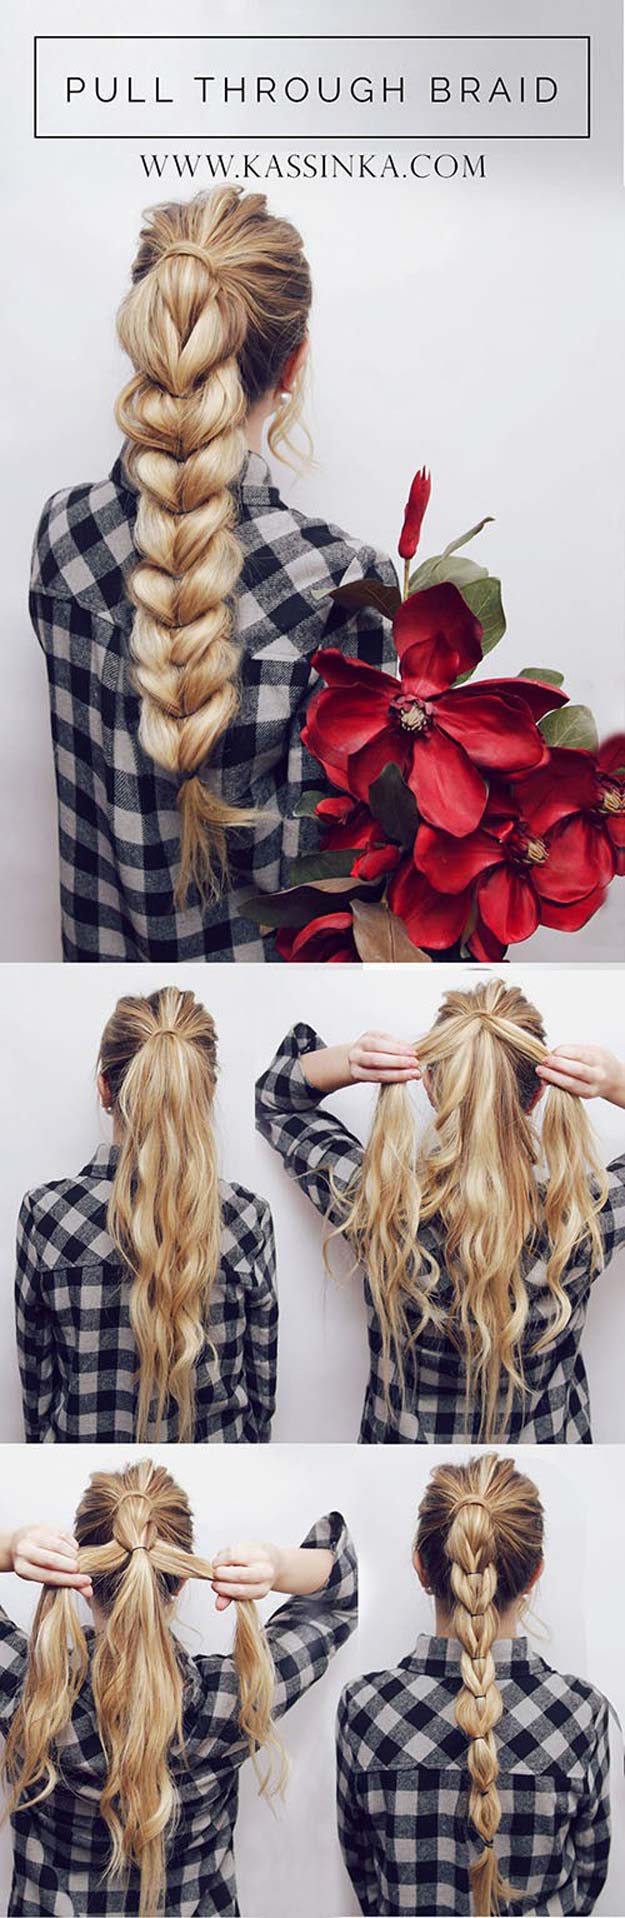 Best Hair Braiding Tutorials - Pull Through Braid Tutorial - Easy Step by Step Tutorials for Braids - How To Braid Fishtail, French Braids, Flower Crown, Side Braids, Cornrows, Updos - Cool Braided Hairstyles for Girls, Teens and Women - School, Day and Evening, Boho, Casual and Formal Looks #hairstyles #braiding #braidingtutorials #diyhair 